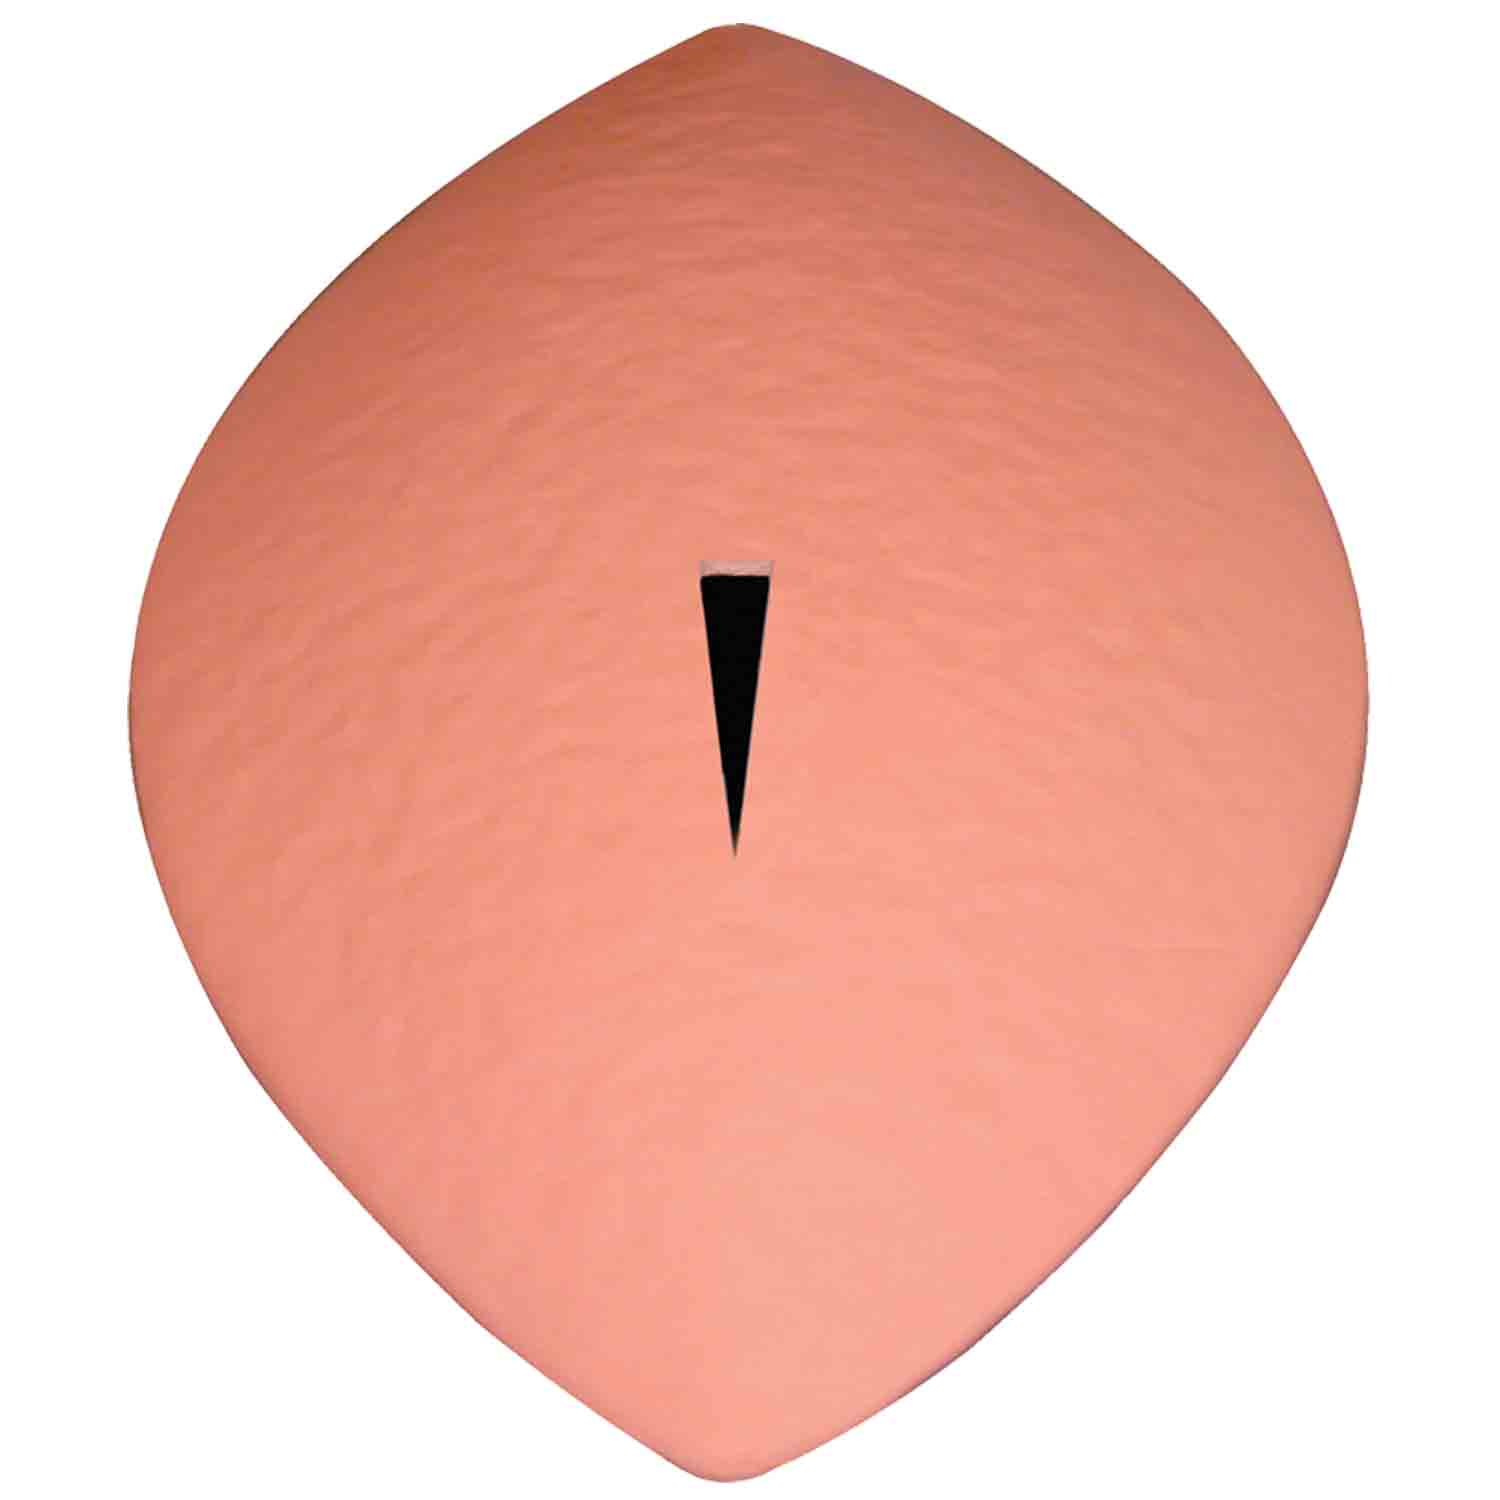 Memento Biodegradable Water Urn for Ashes in Coral Pink Top View